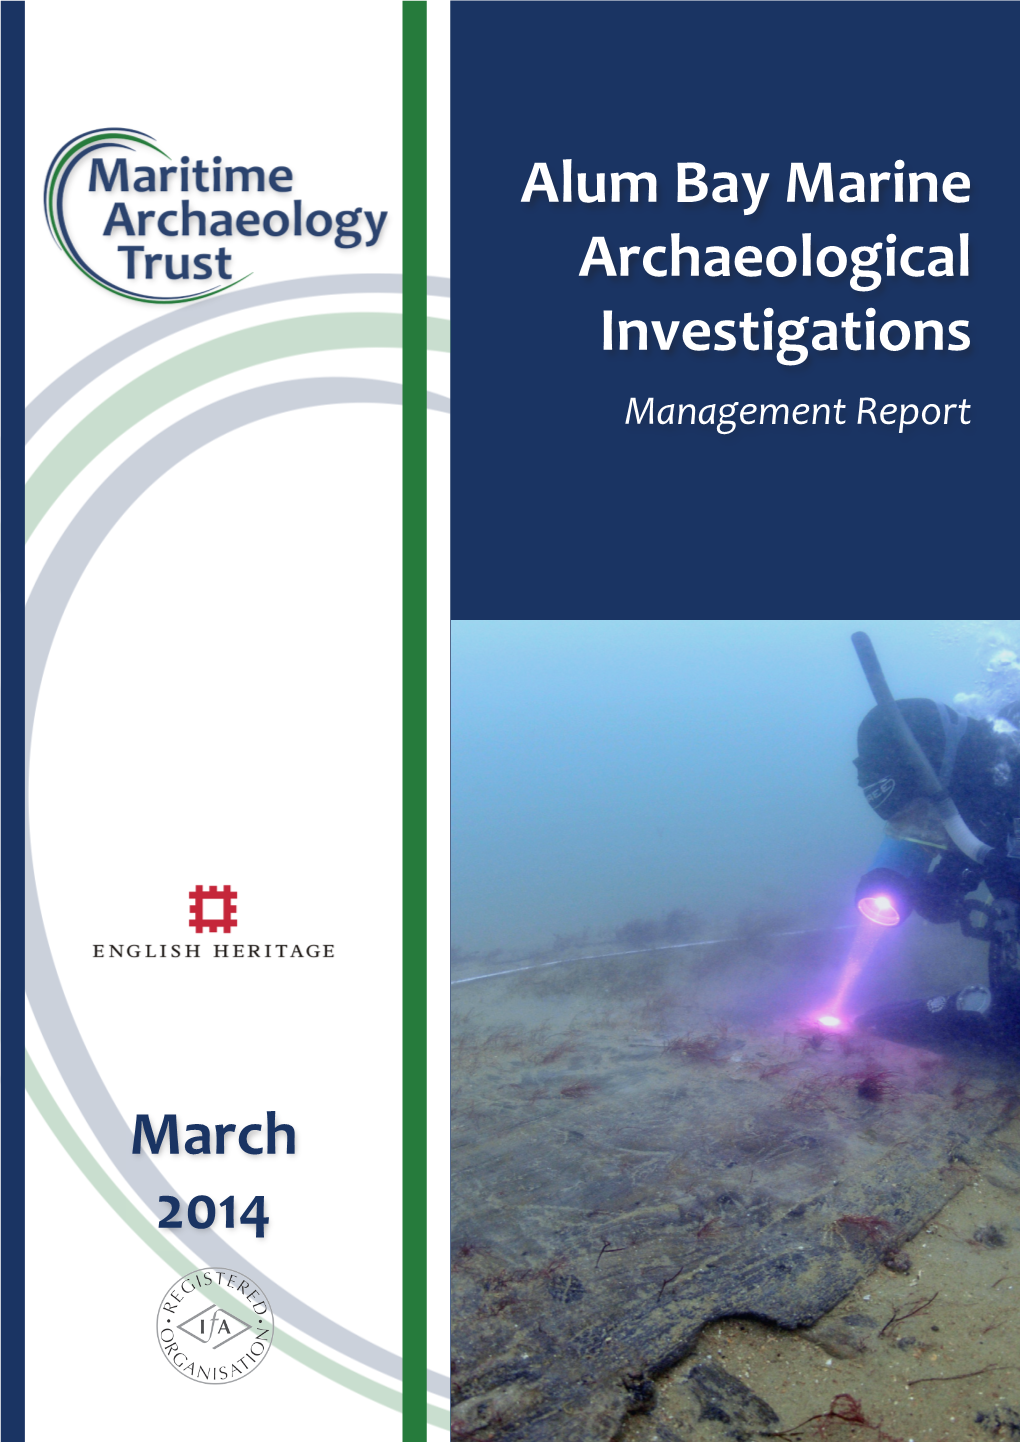 March 2014 Alum Bay Marine Archaeological Investigations Management Report